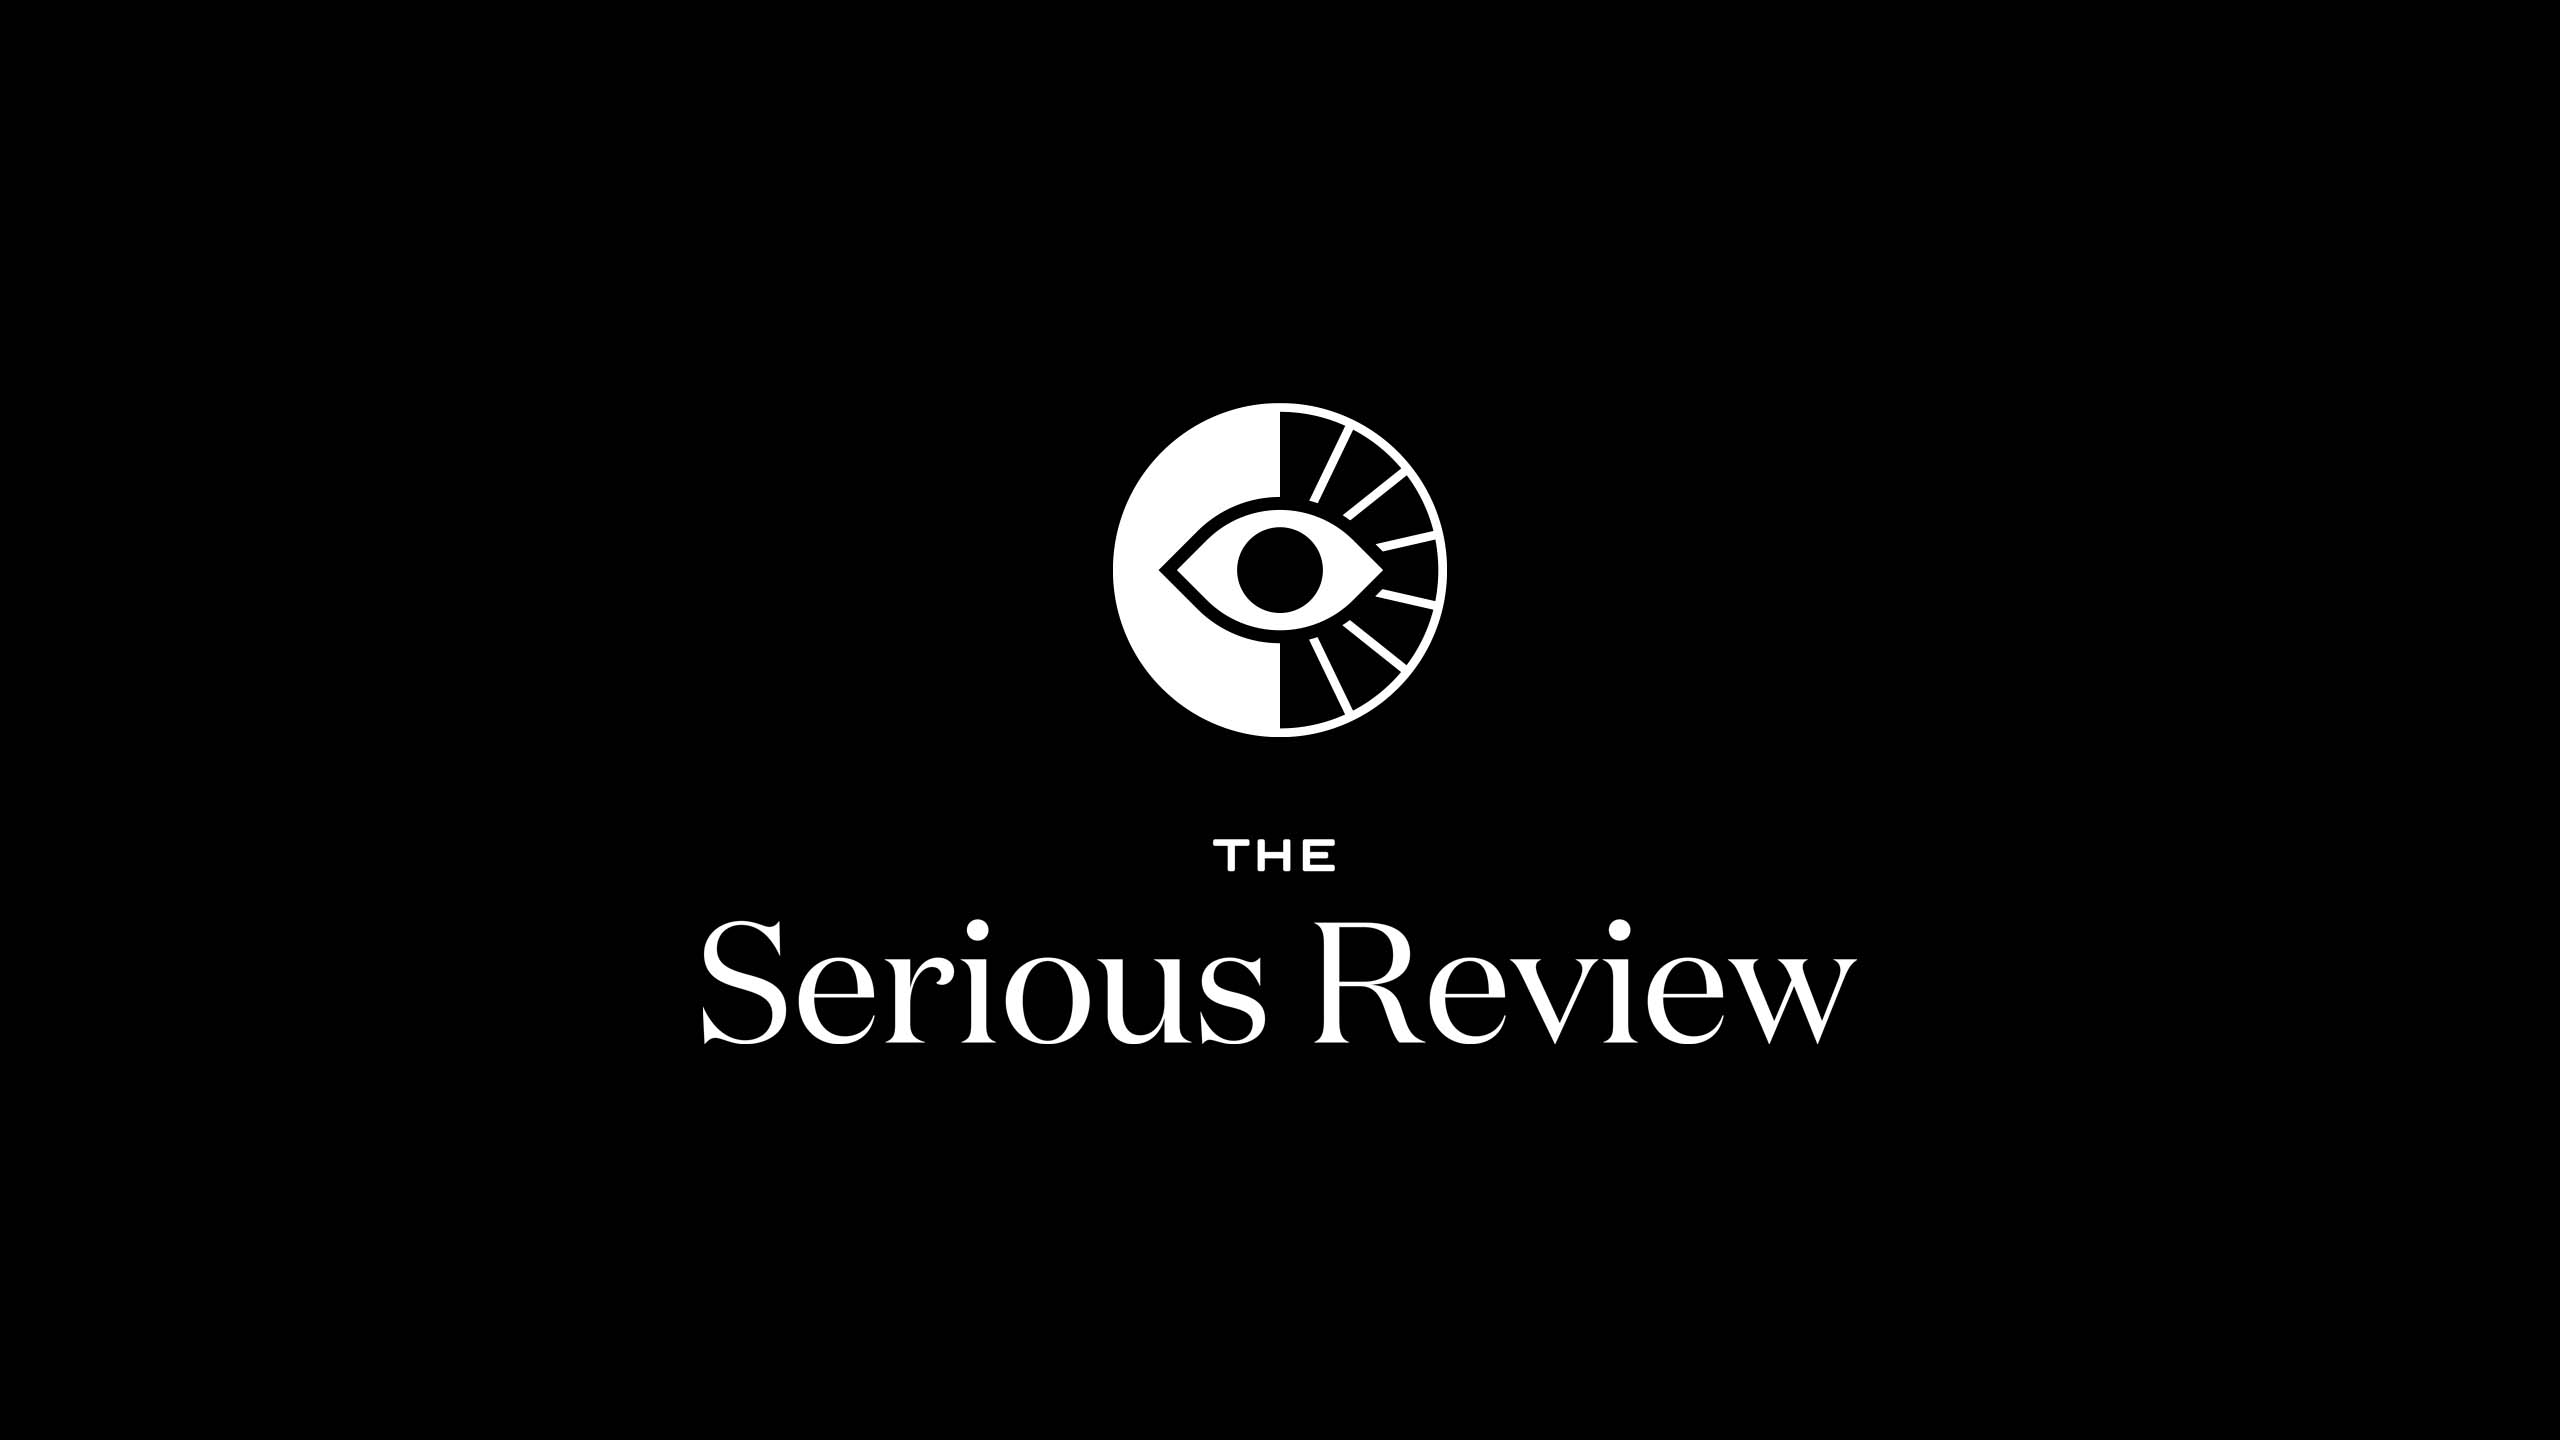 The-Serious-Review-Design-01